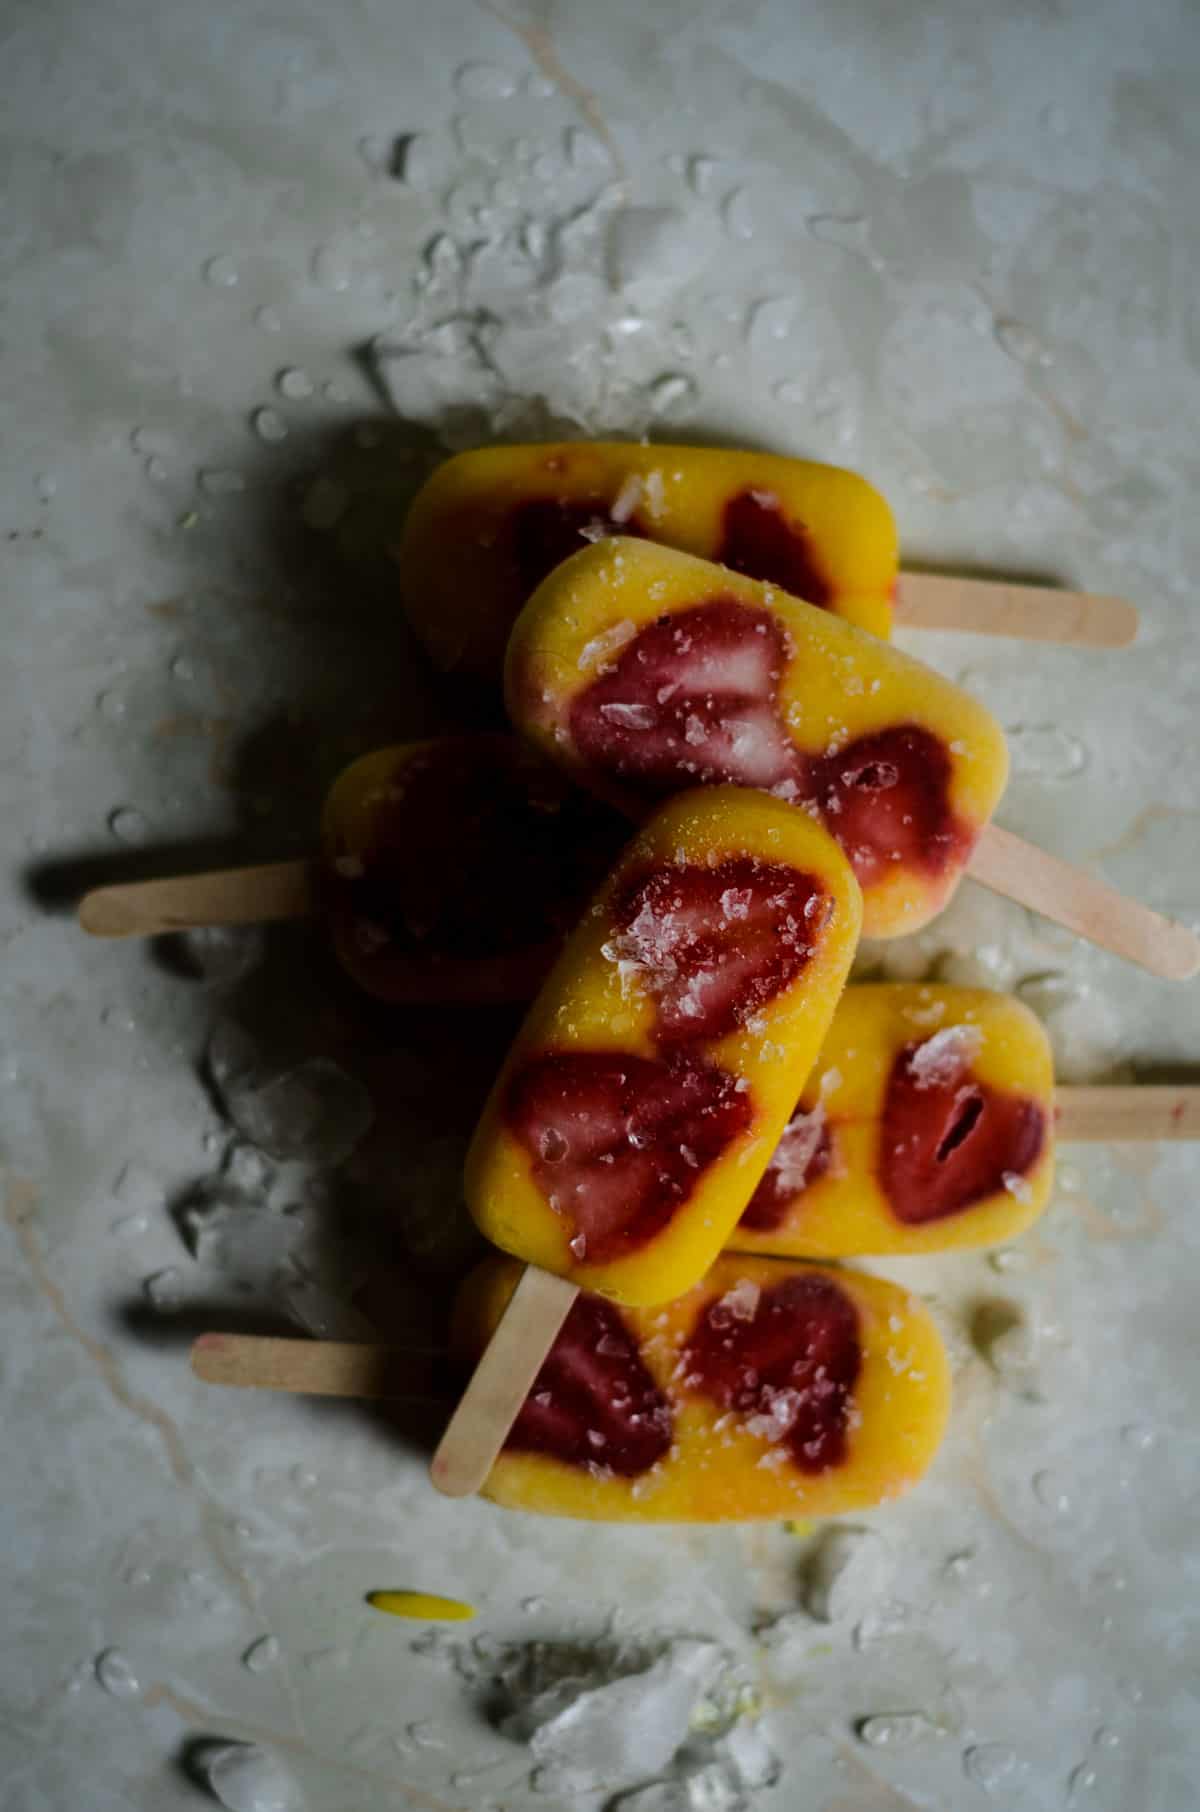 Mango popsicles with strawberry chunks.